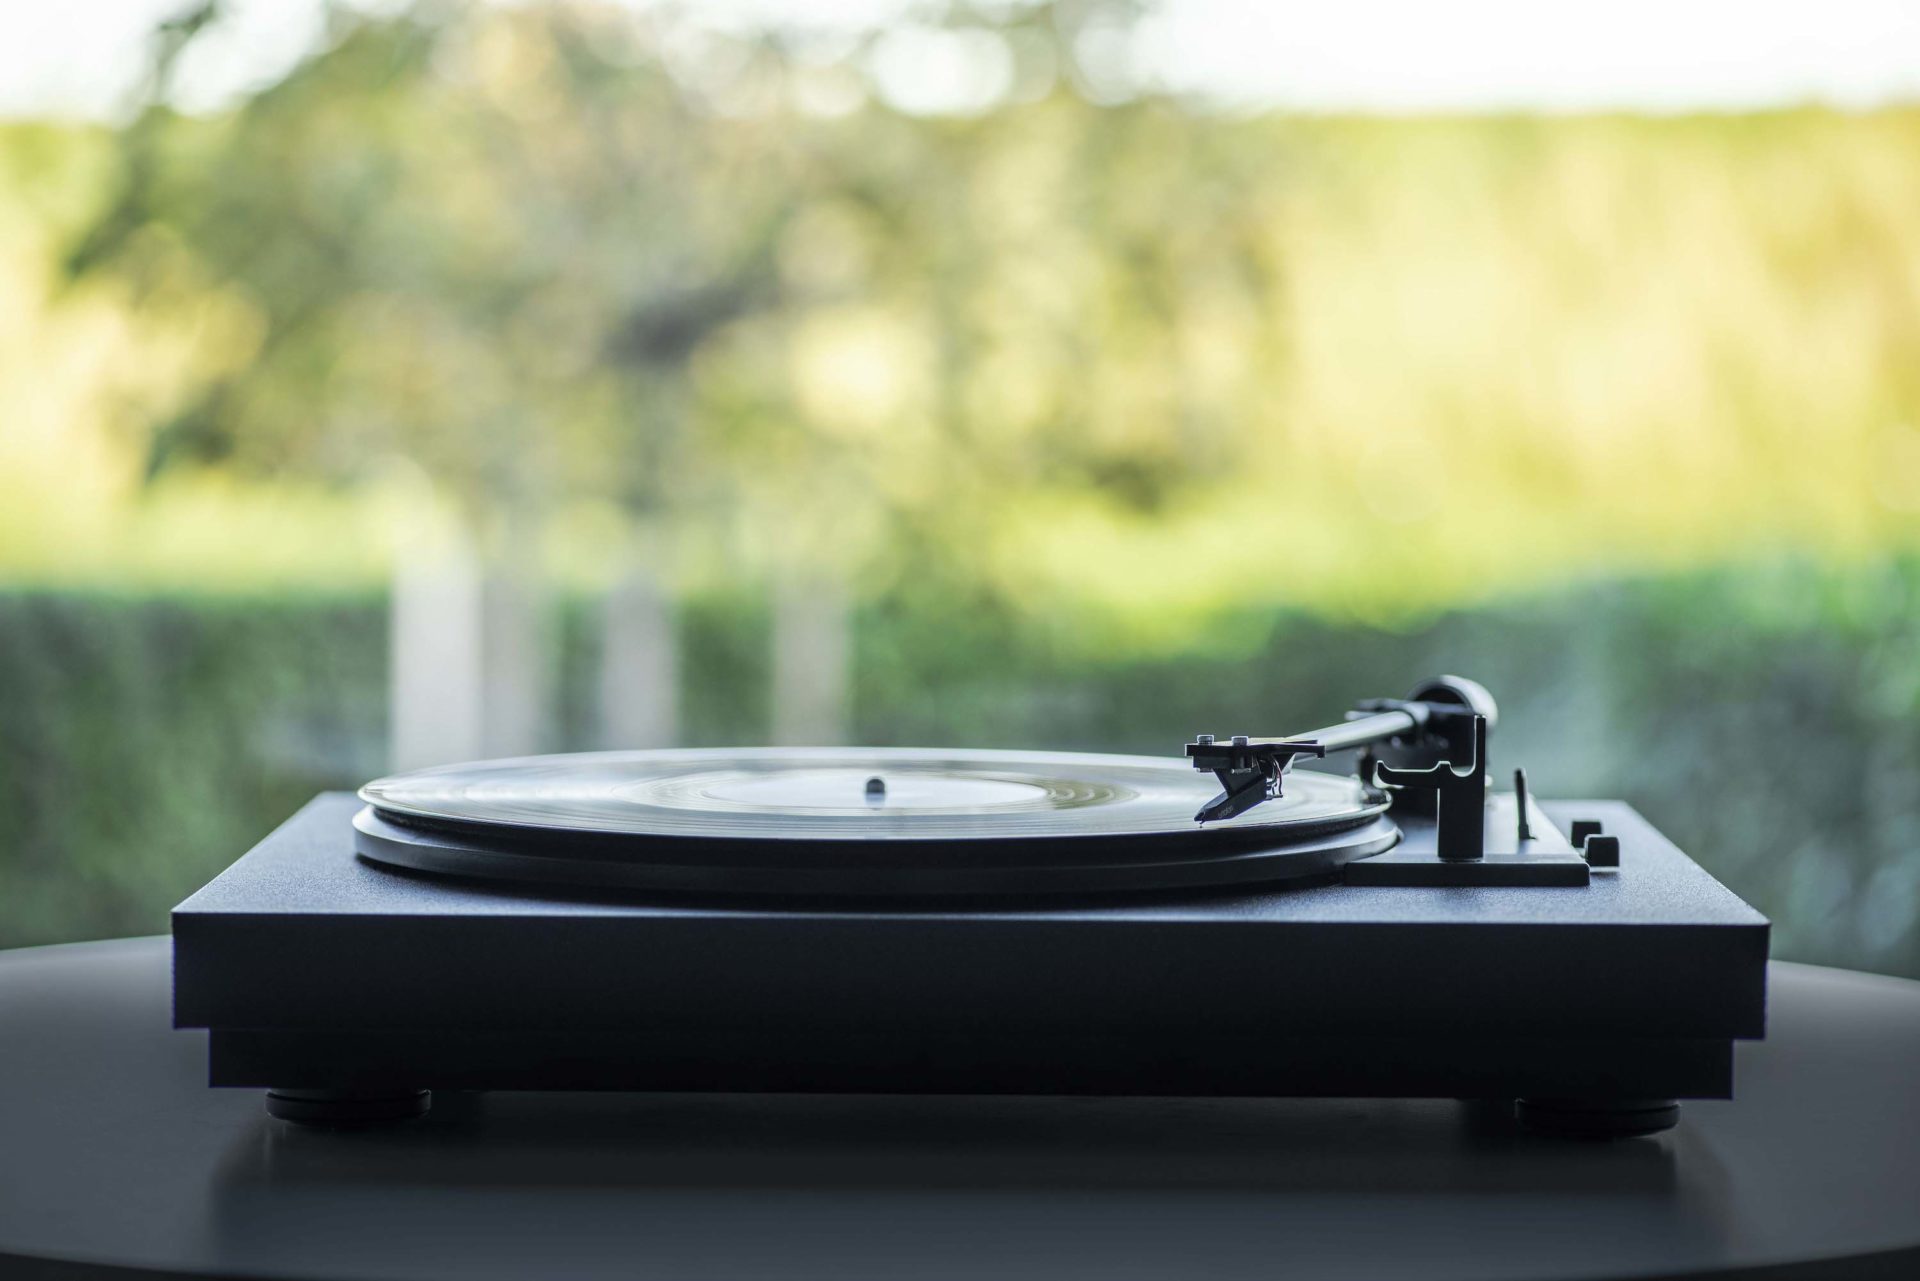 turntable with greenery in the background